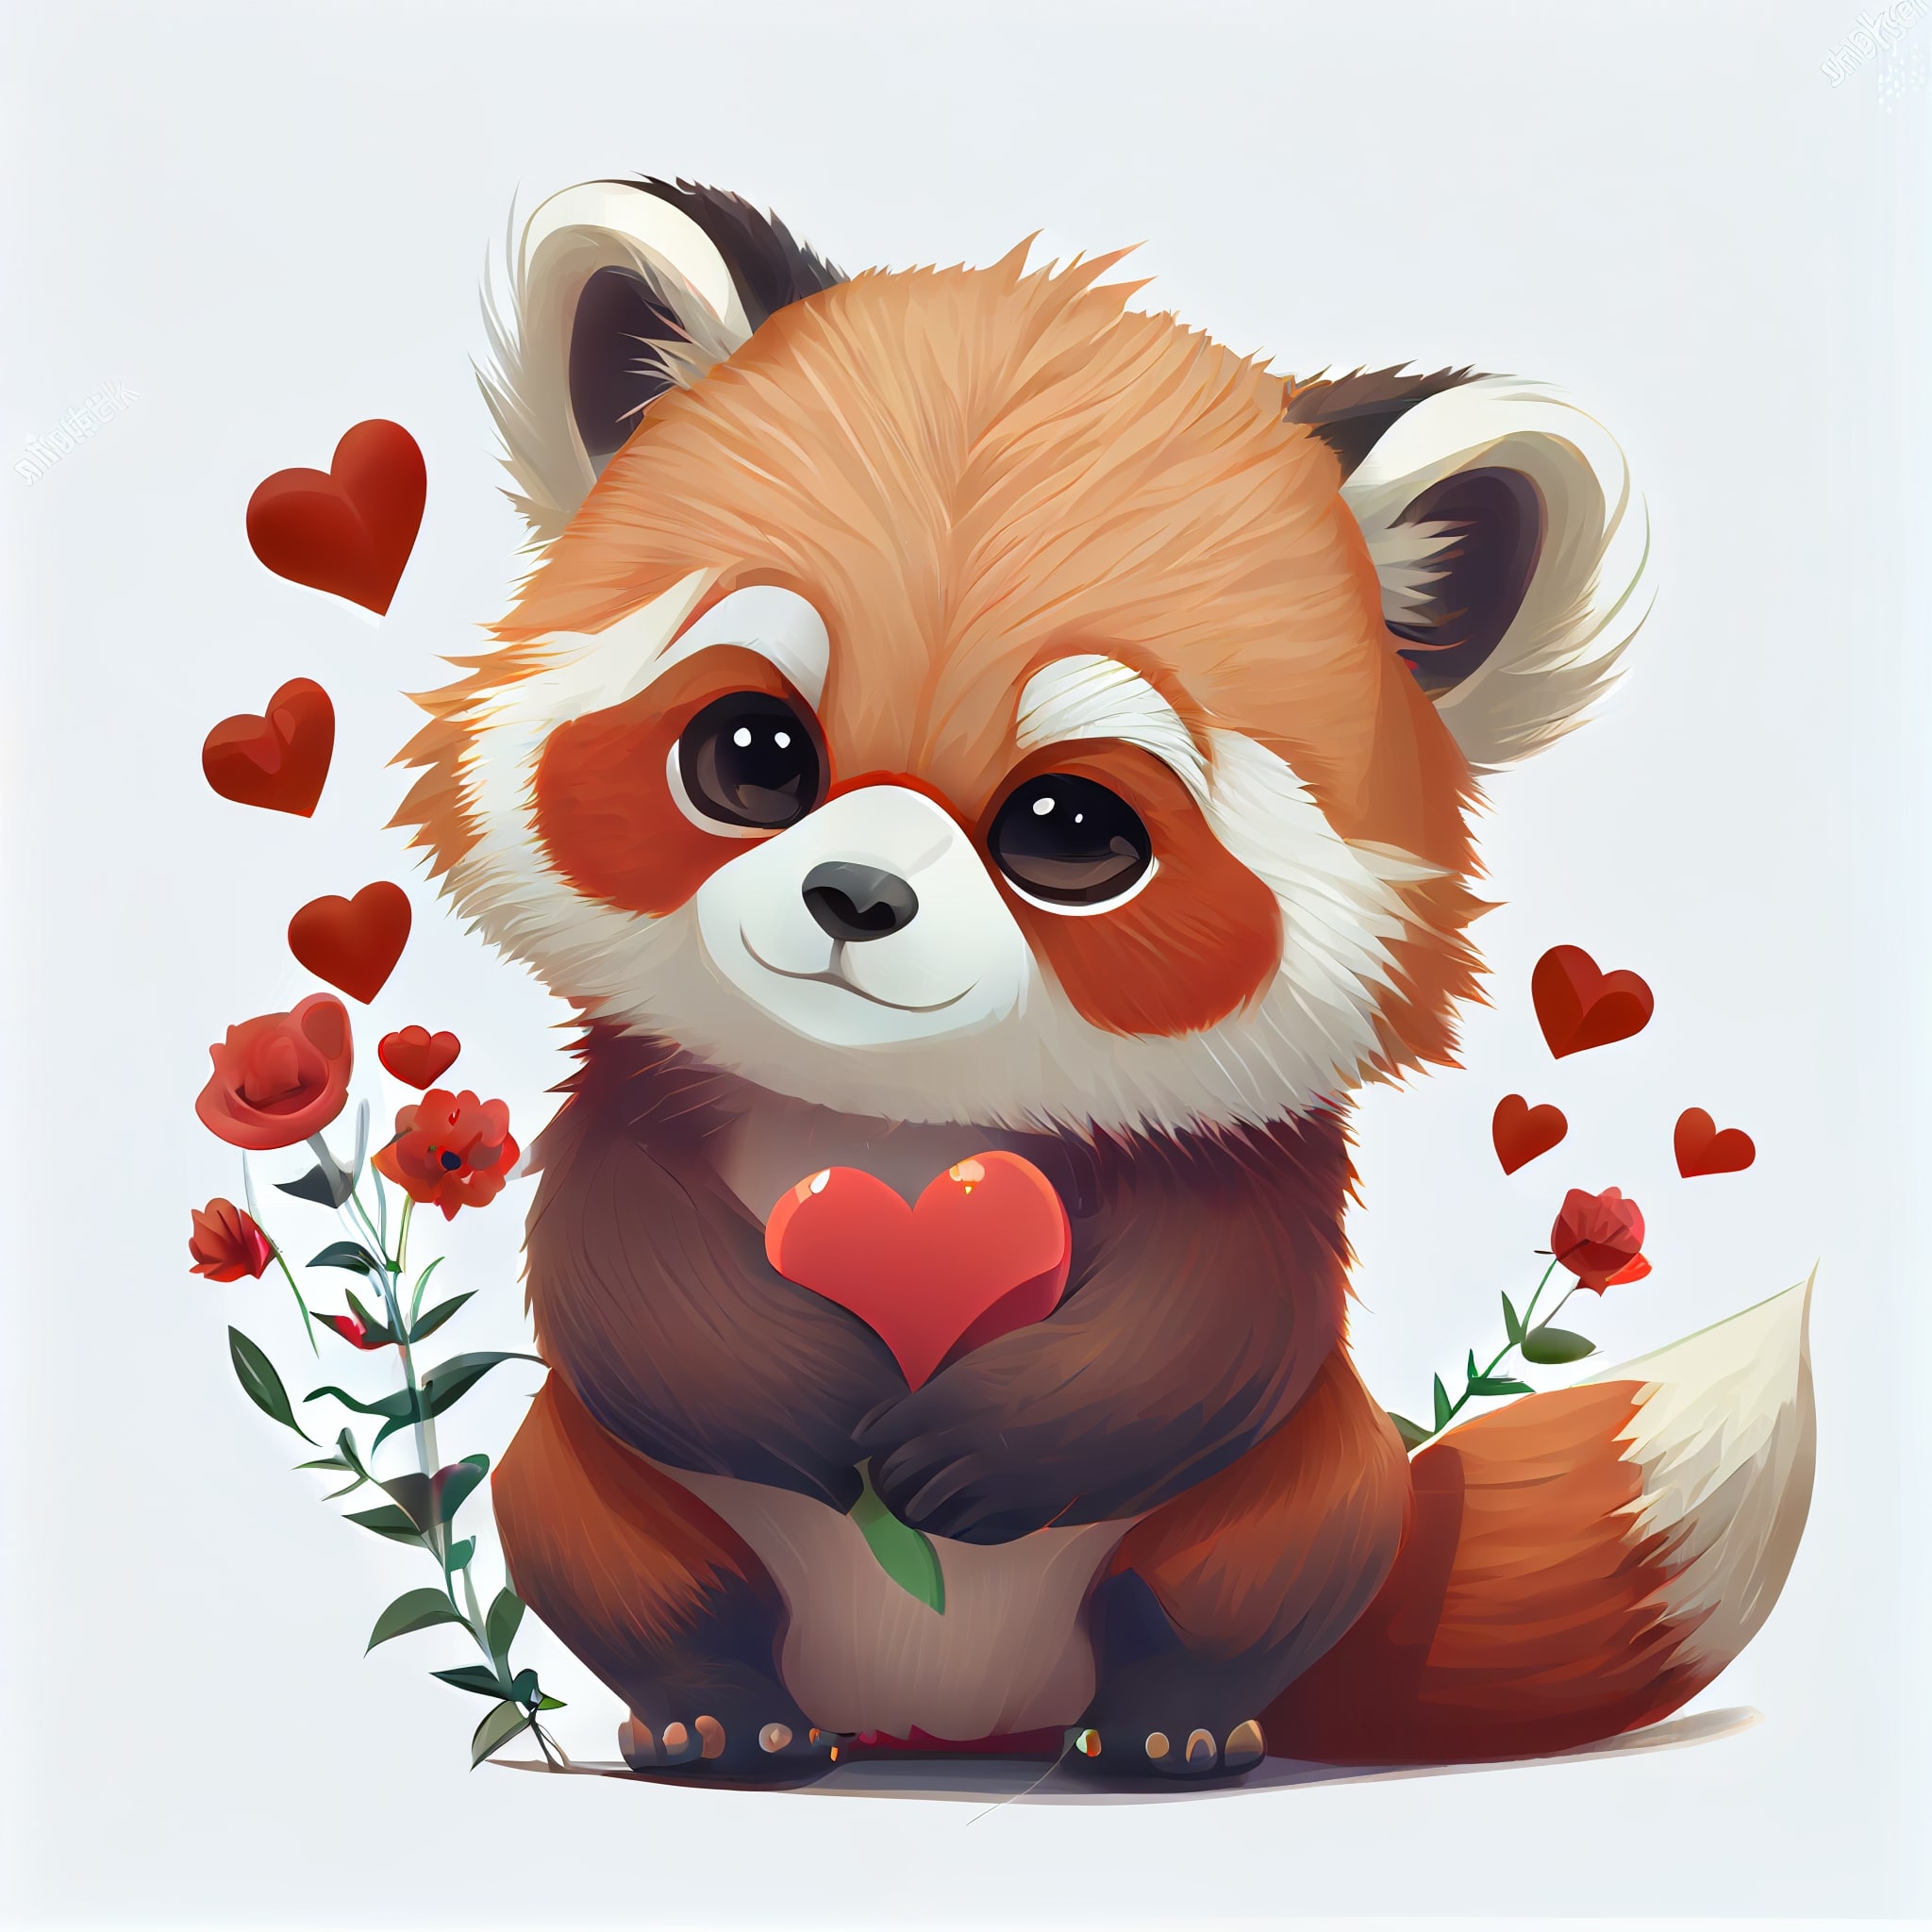 Red panda holding a heart surrounded by flowers.